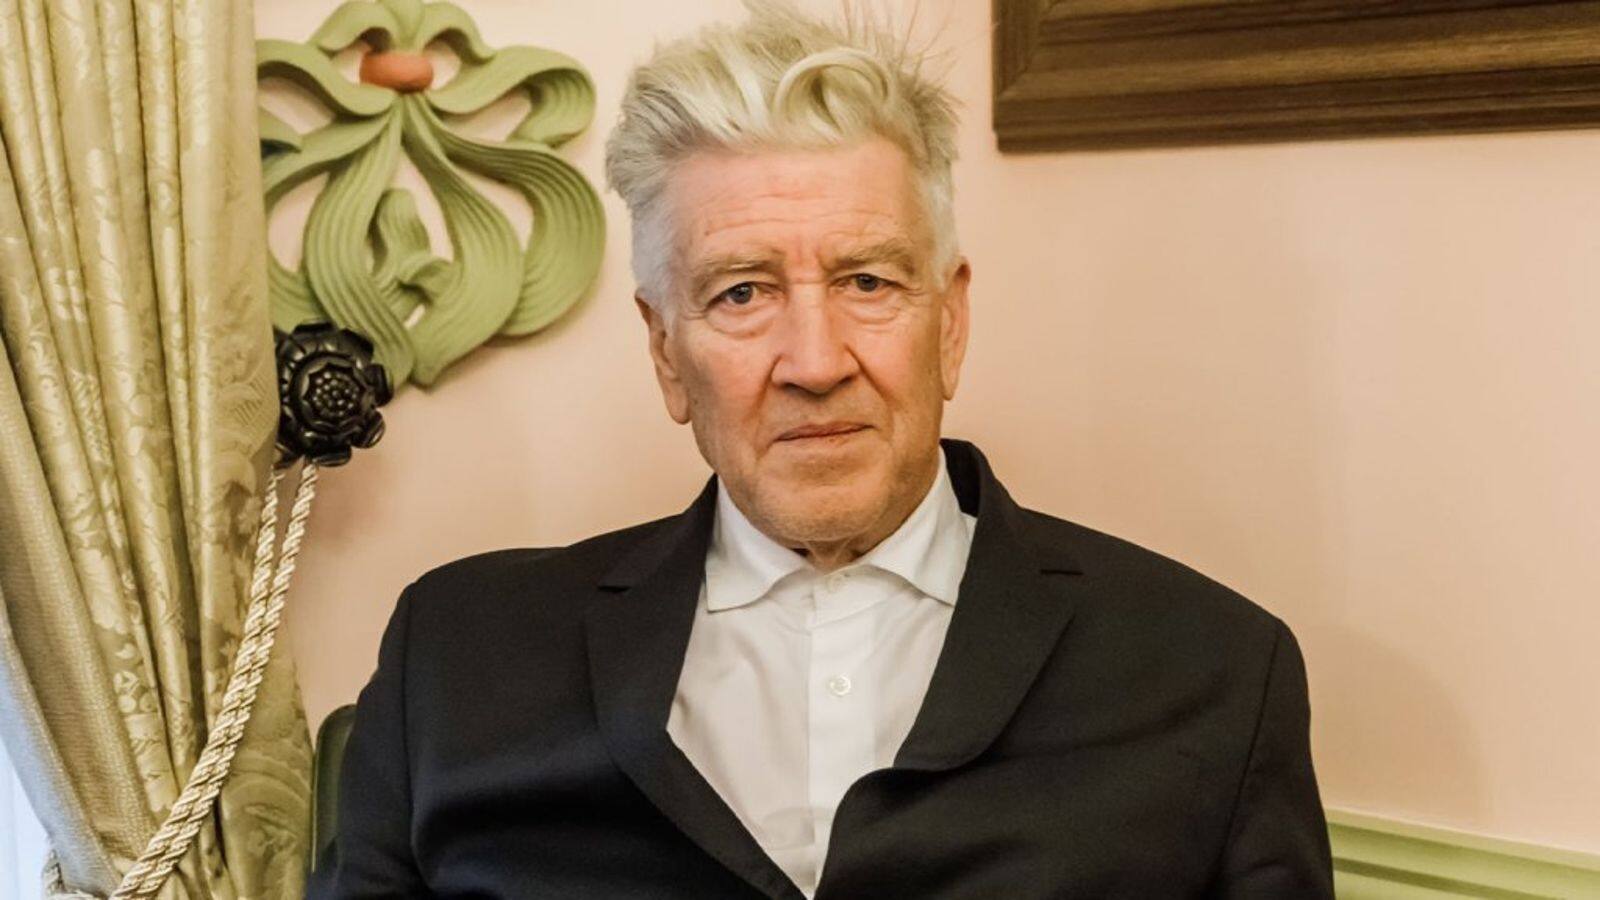 David Lynch teases 'something is coming' on June 5